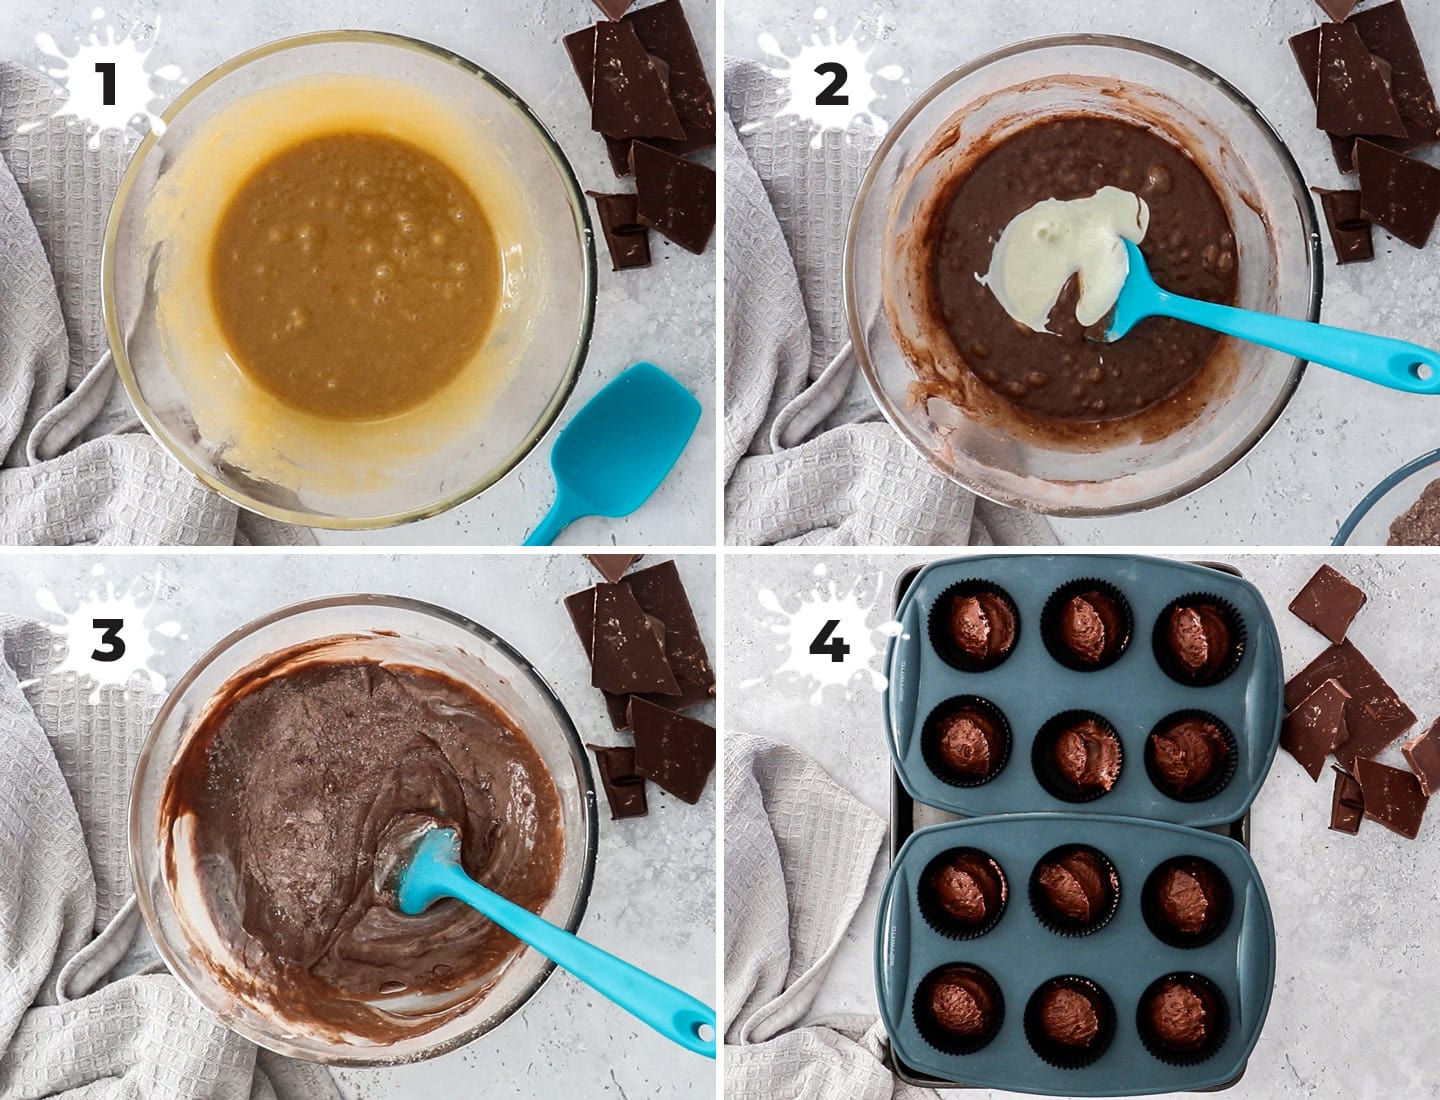 A collage of 4 images showing how to make chocolate cupcakes.